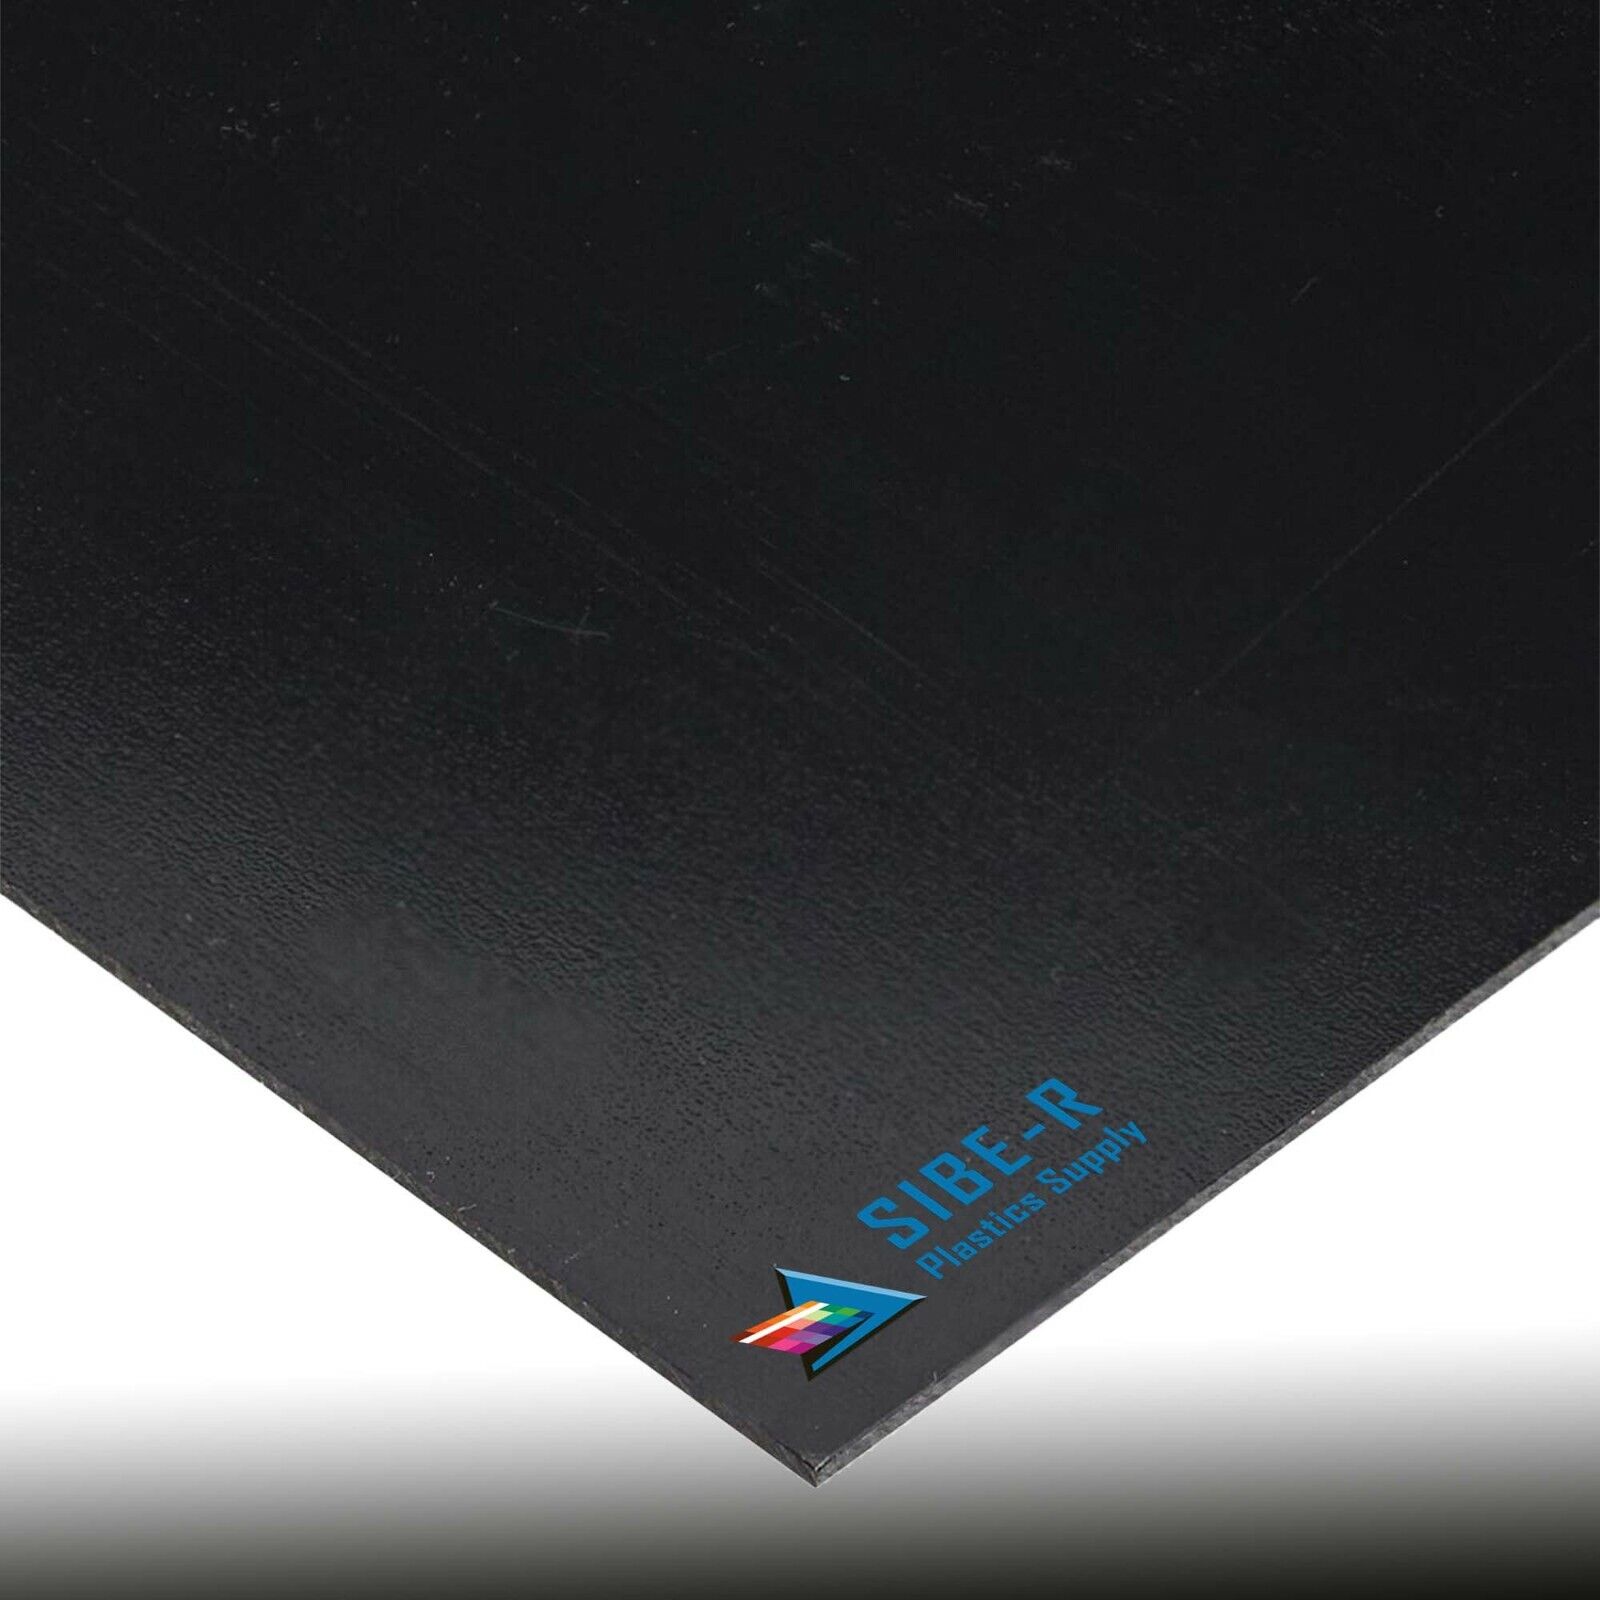 BLACK KYDEX T PLASTIC SHEET 0.028" VACUUM FORMING YOU PICK SIZE^ Kydex Does Not Apply